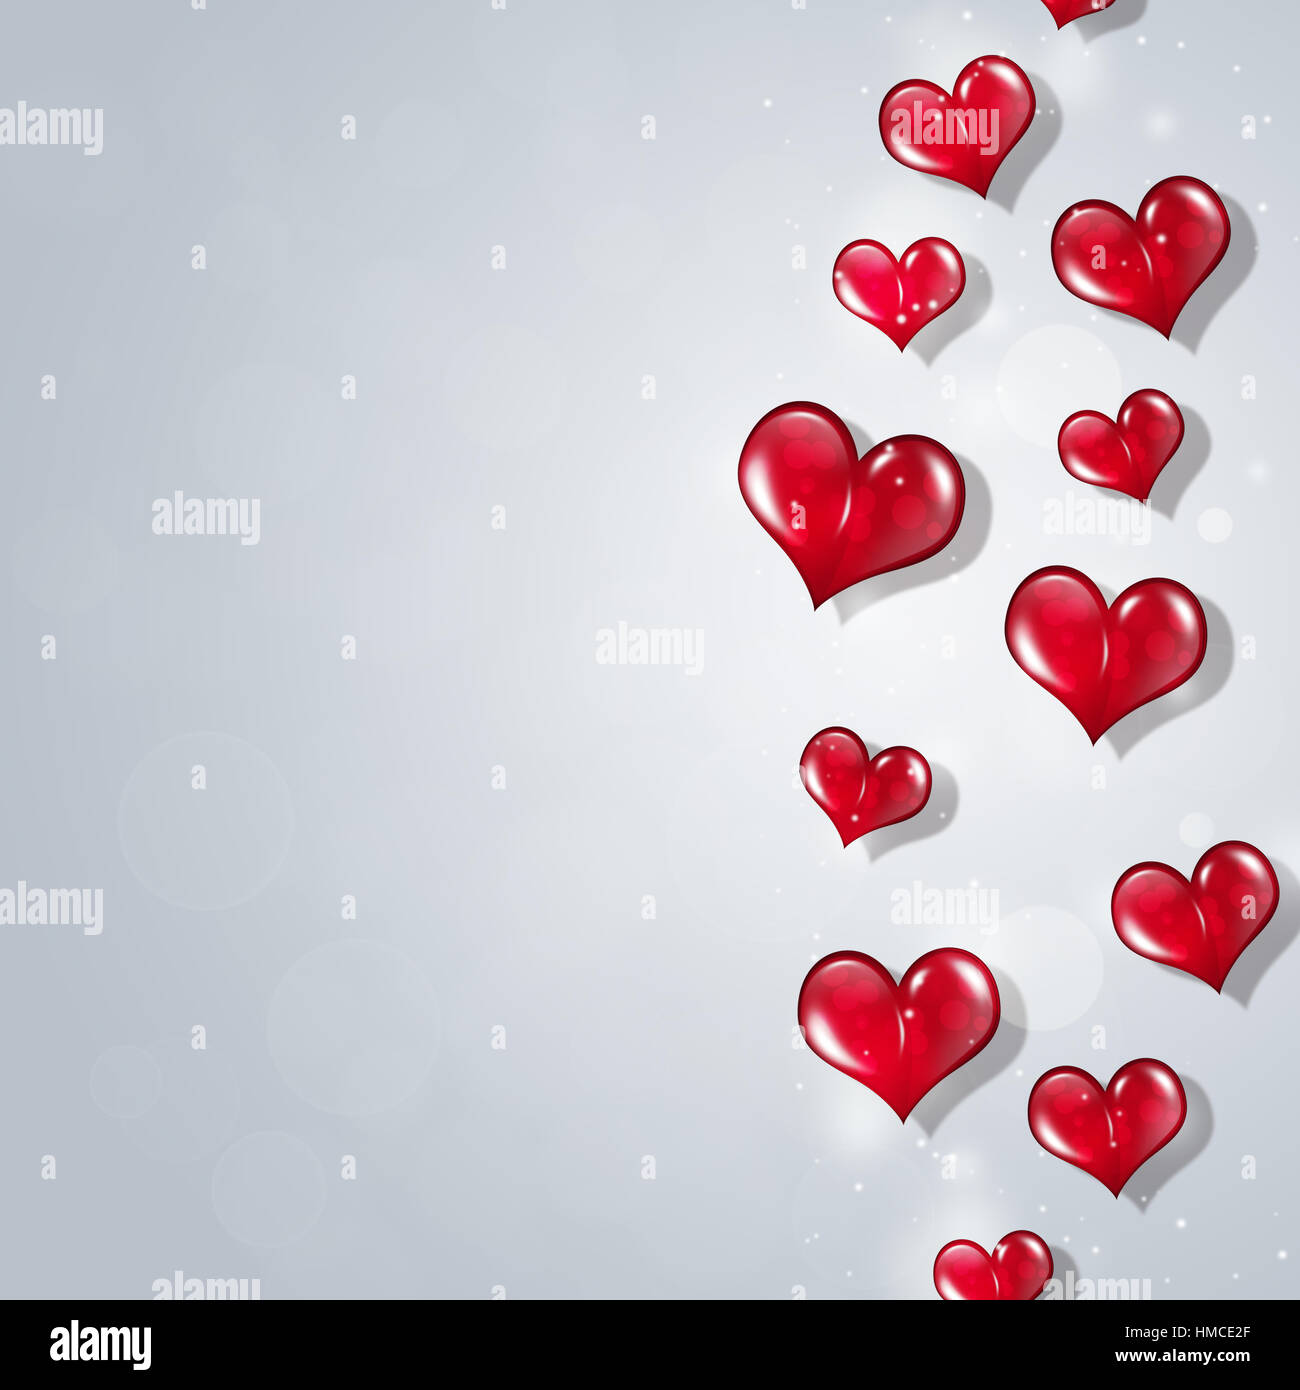 valentines day celebration background with red hearts Stock Photo